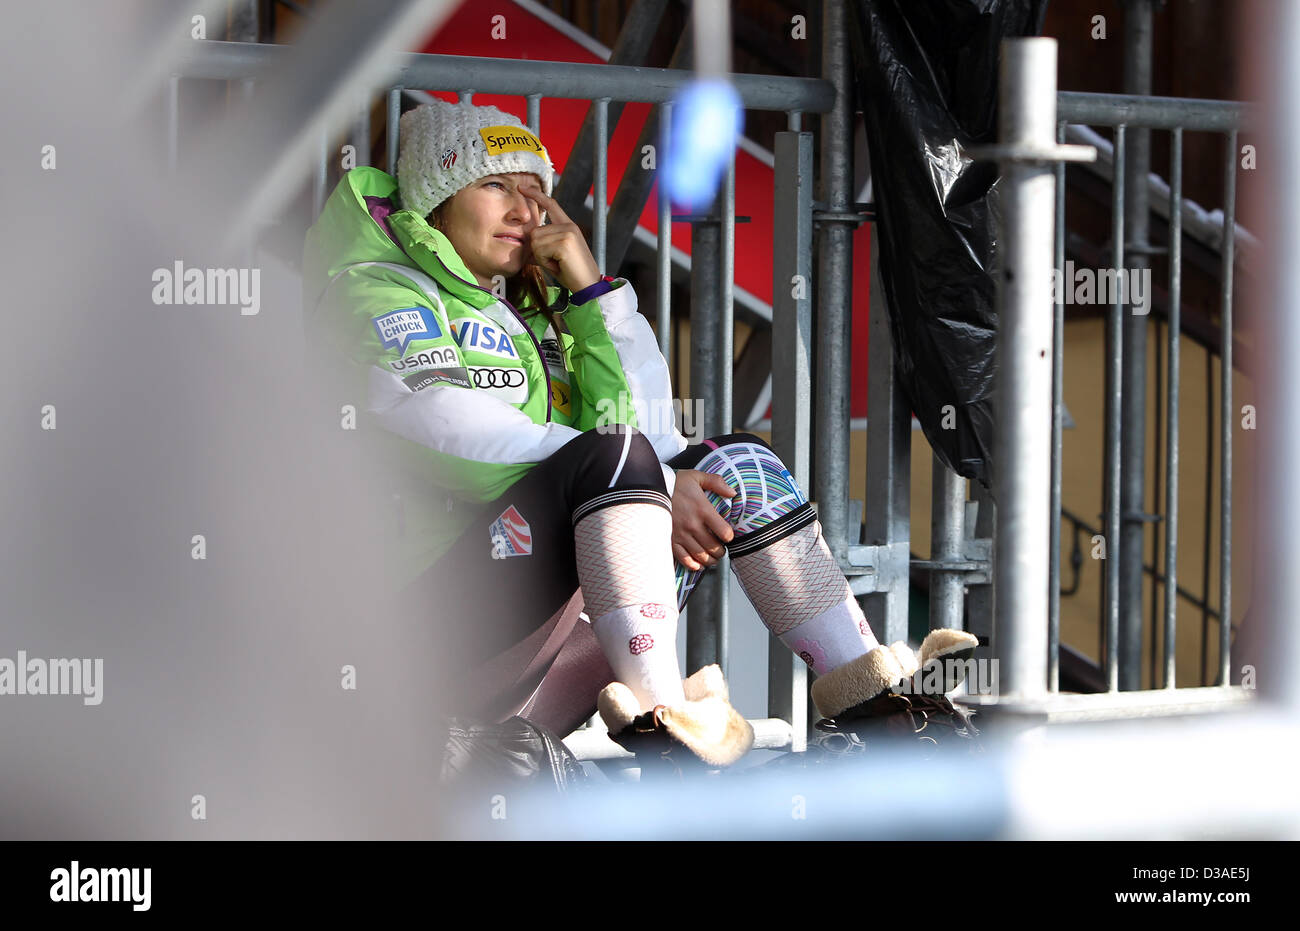 Julia Mancuso of US sits in the finish area after her run at the women's giant slalom at the Alpine Skiing World Championships in Schladming, Austria, 14 February 2013. Photo: Karl-Josef Hildenbrand/dpa Stock Photo